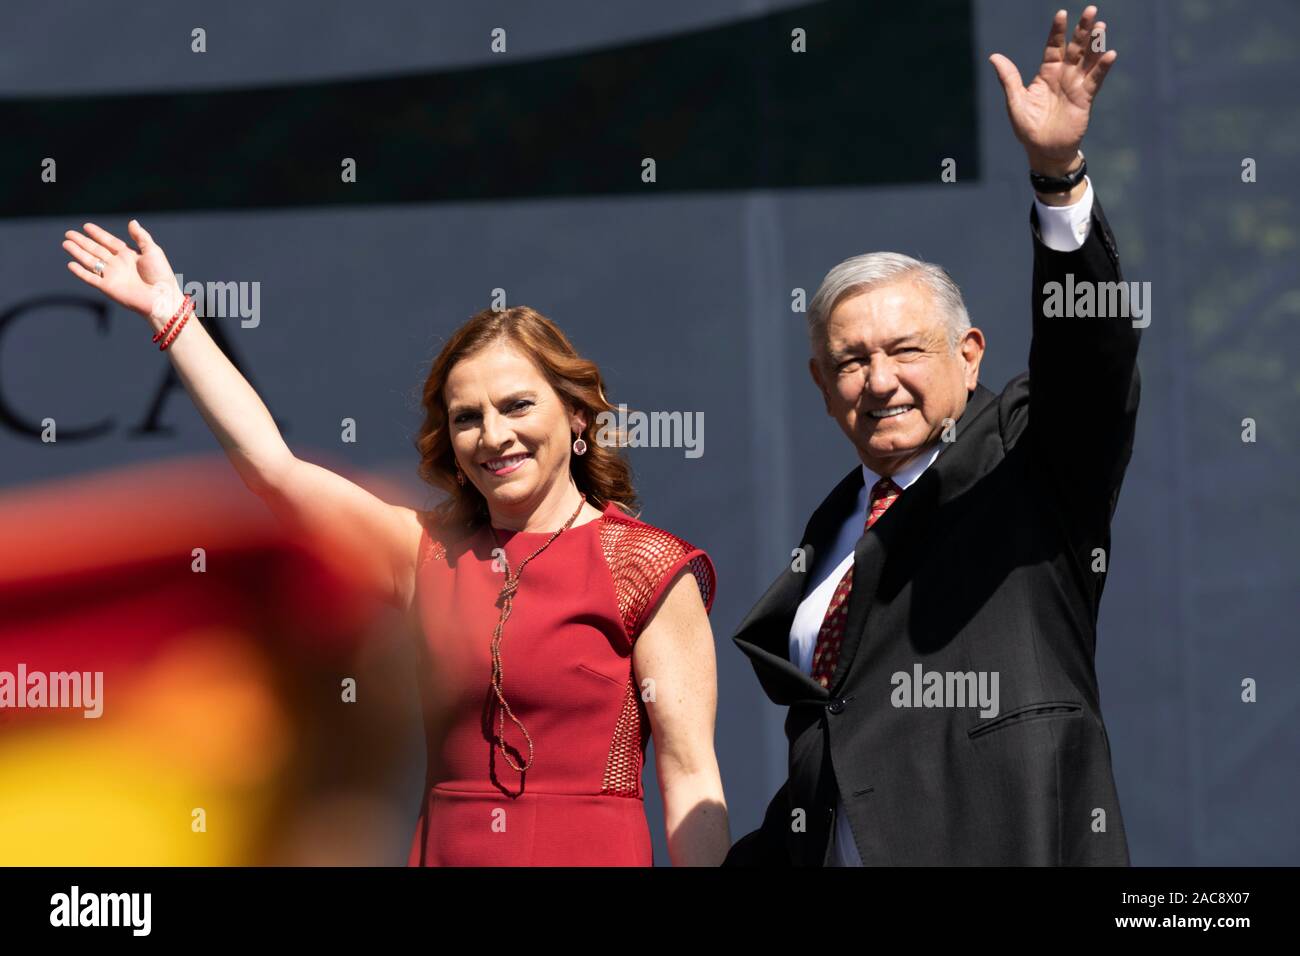 Mexico City, Mexico. 1st Dec, 2019. Mexican President Andres Manuel Lopez Obrador (R) greets his supporters accompanied by his wife Beatriz Gutierrez Muller during a ceremony marking his first full year in office in Mexico City, capital of Mexico, on Dec. 1, 2019. Decreasing Mexico's high rates of violent crime is the government's main challenge, President Andres Manuel Lopez Obrador said on Sunday. Credit: David de la Paz/Xinhua/Alamy Live News Stock Photo